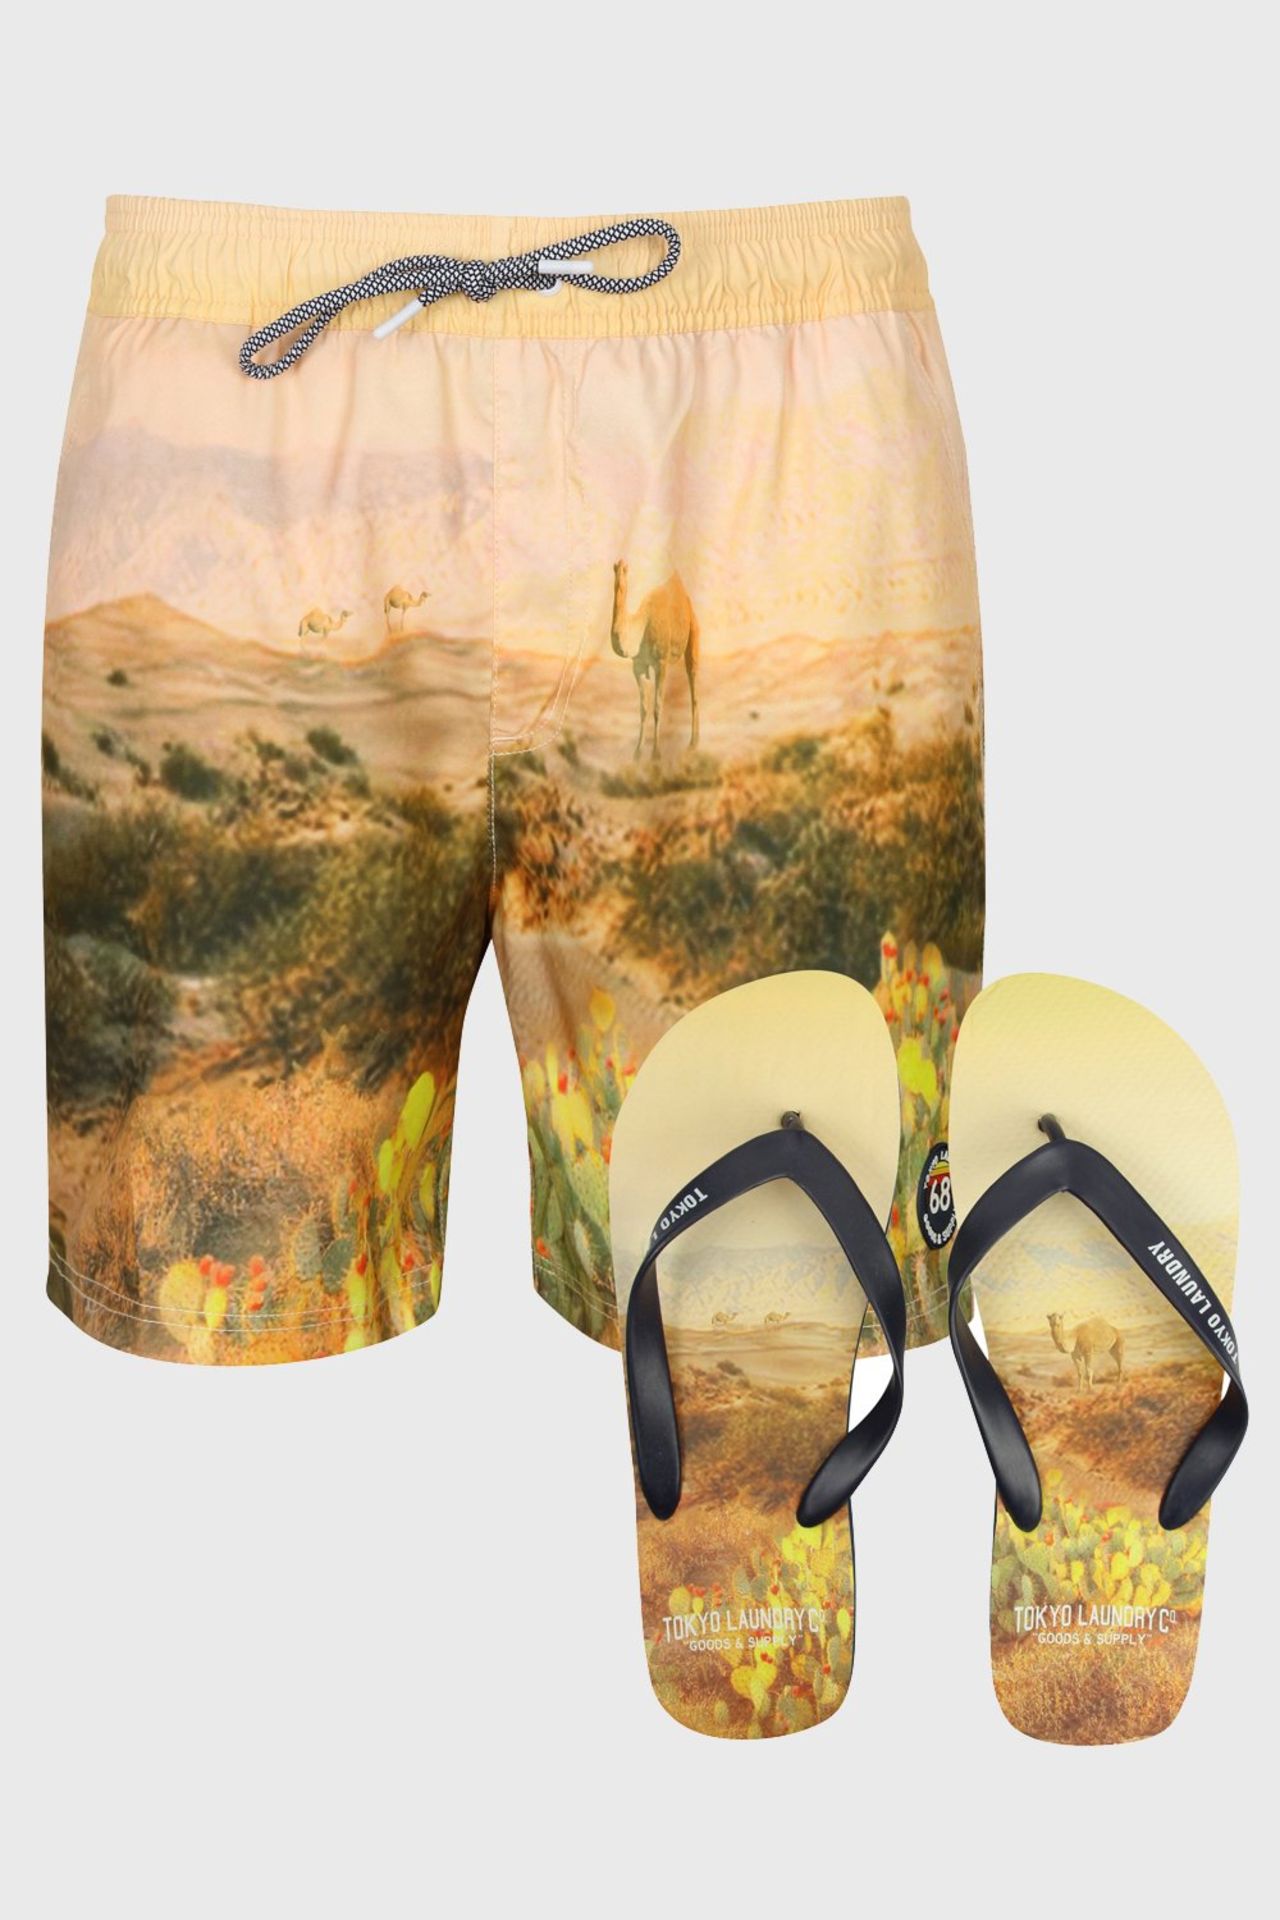 18 X BRAND NEW TOKYO LAUNDRY SWIM SHORTS AND FLIP FLOP SETS IN TL DESERT STLYE IN SIZES - INCLUDES